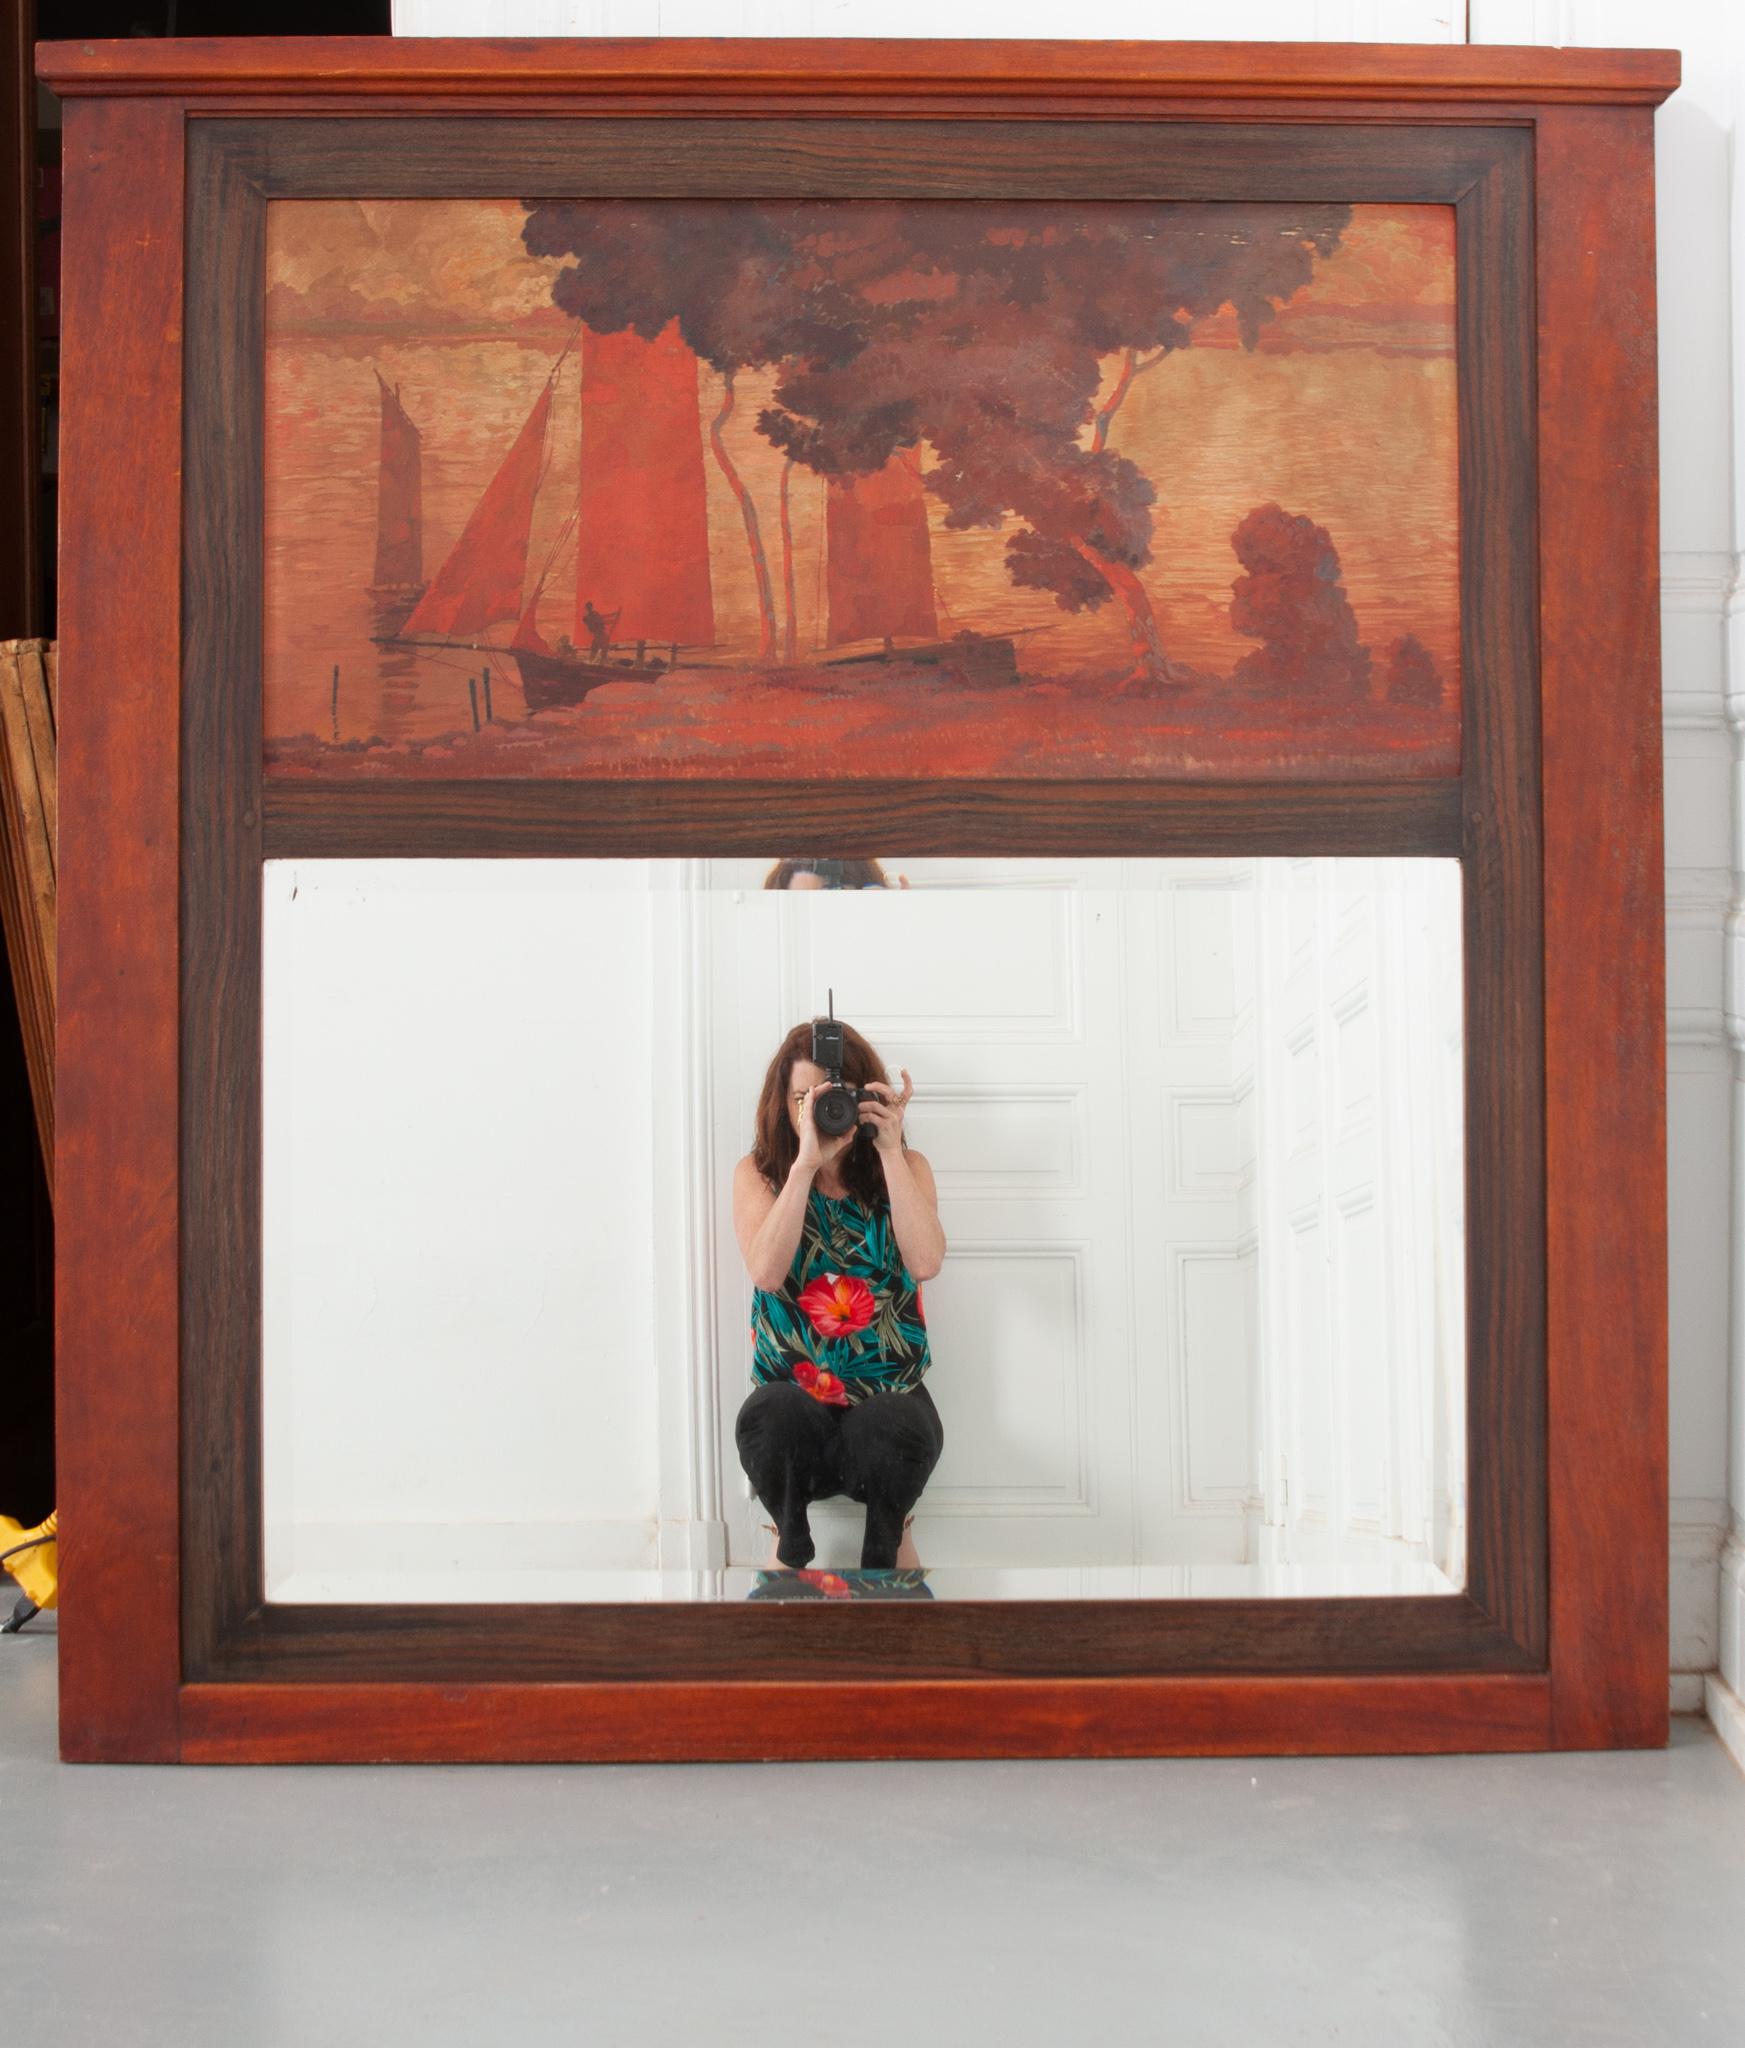 A gorgeous 19th century French trumeau. Framed in mahogany and rosewood, a beautiful oil on board painting of a warm coastal scene is fixed above the mirror. The beveled mirror may be more recent to the piece. Cleaned and polished with French wax,